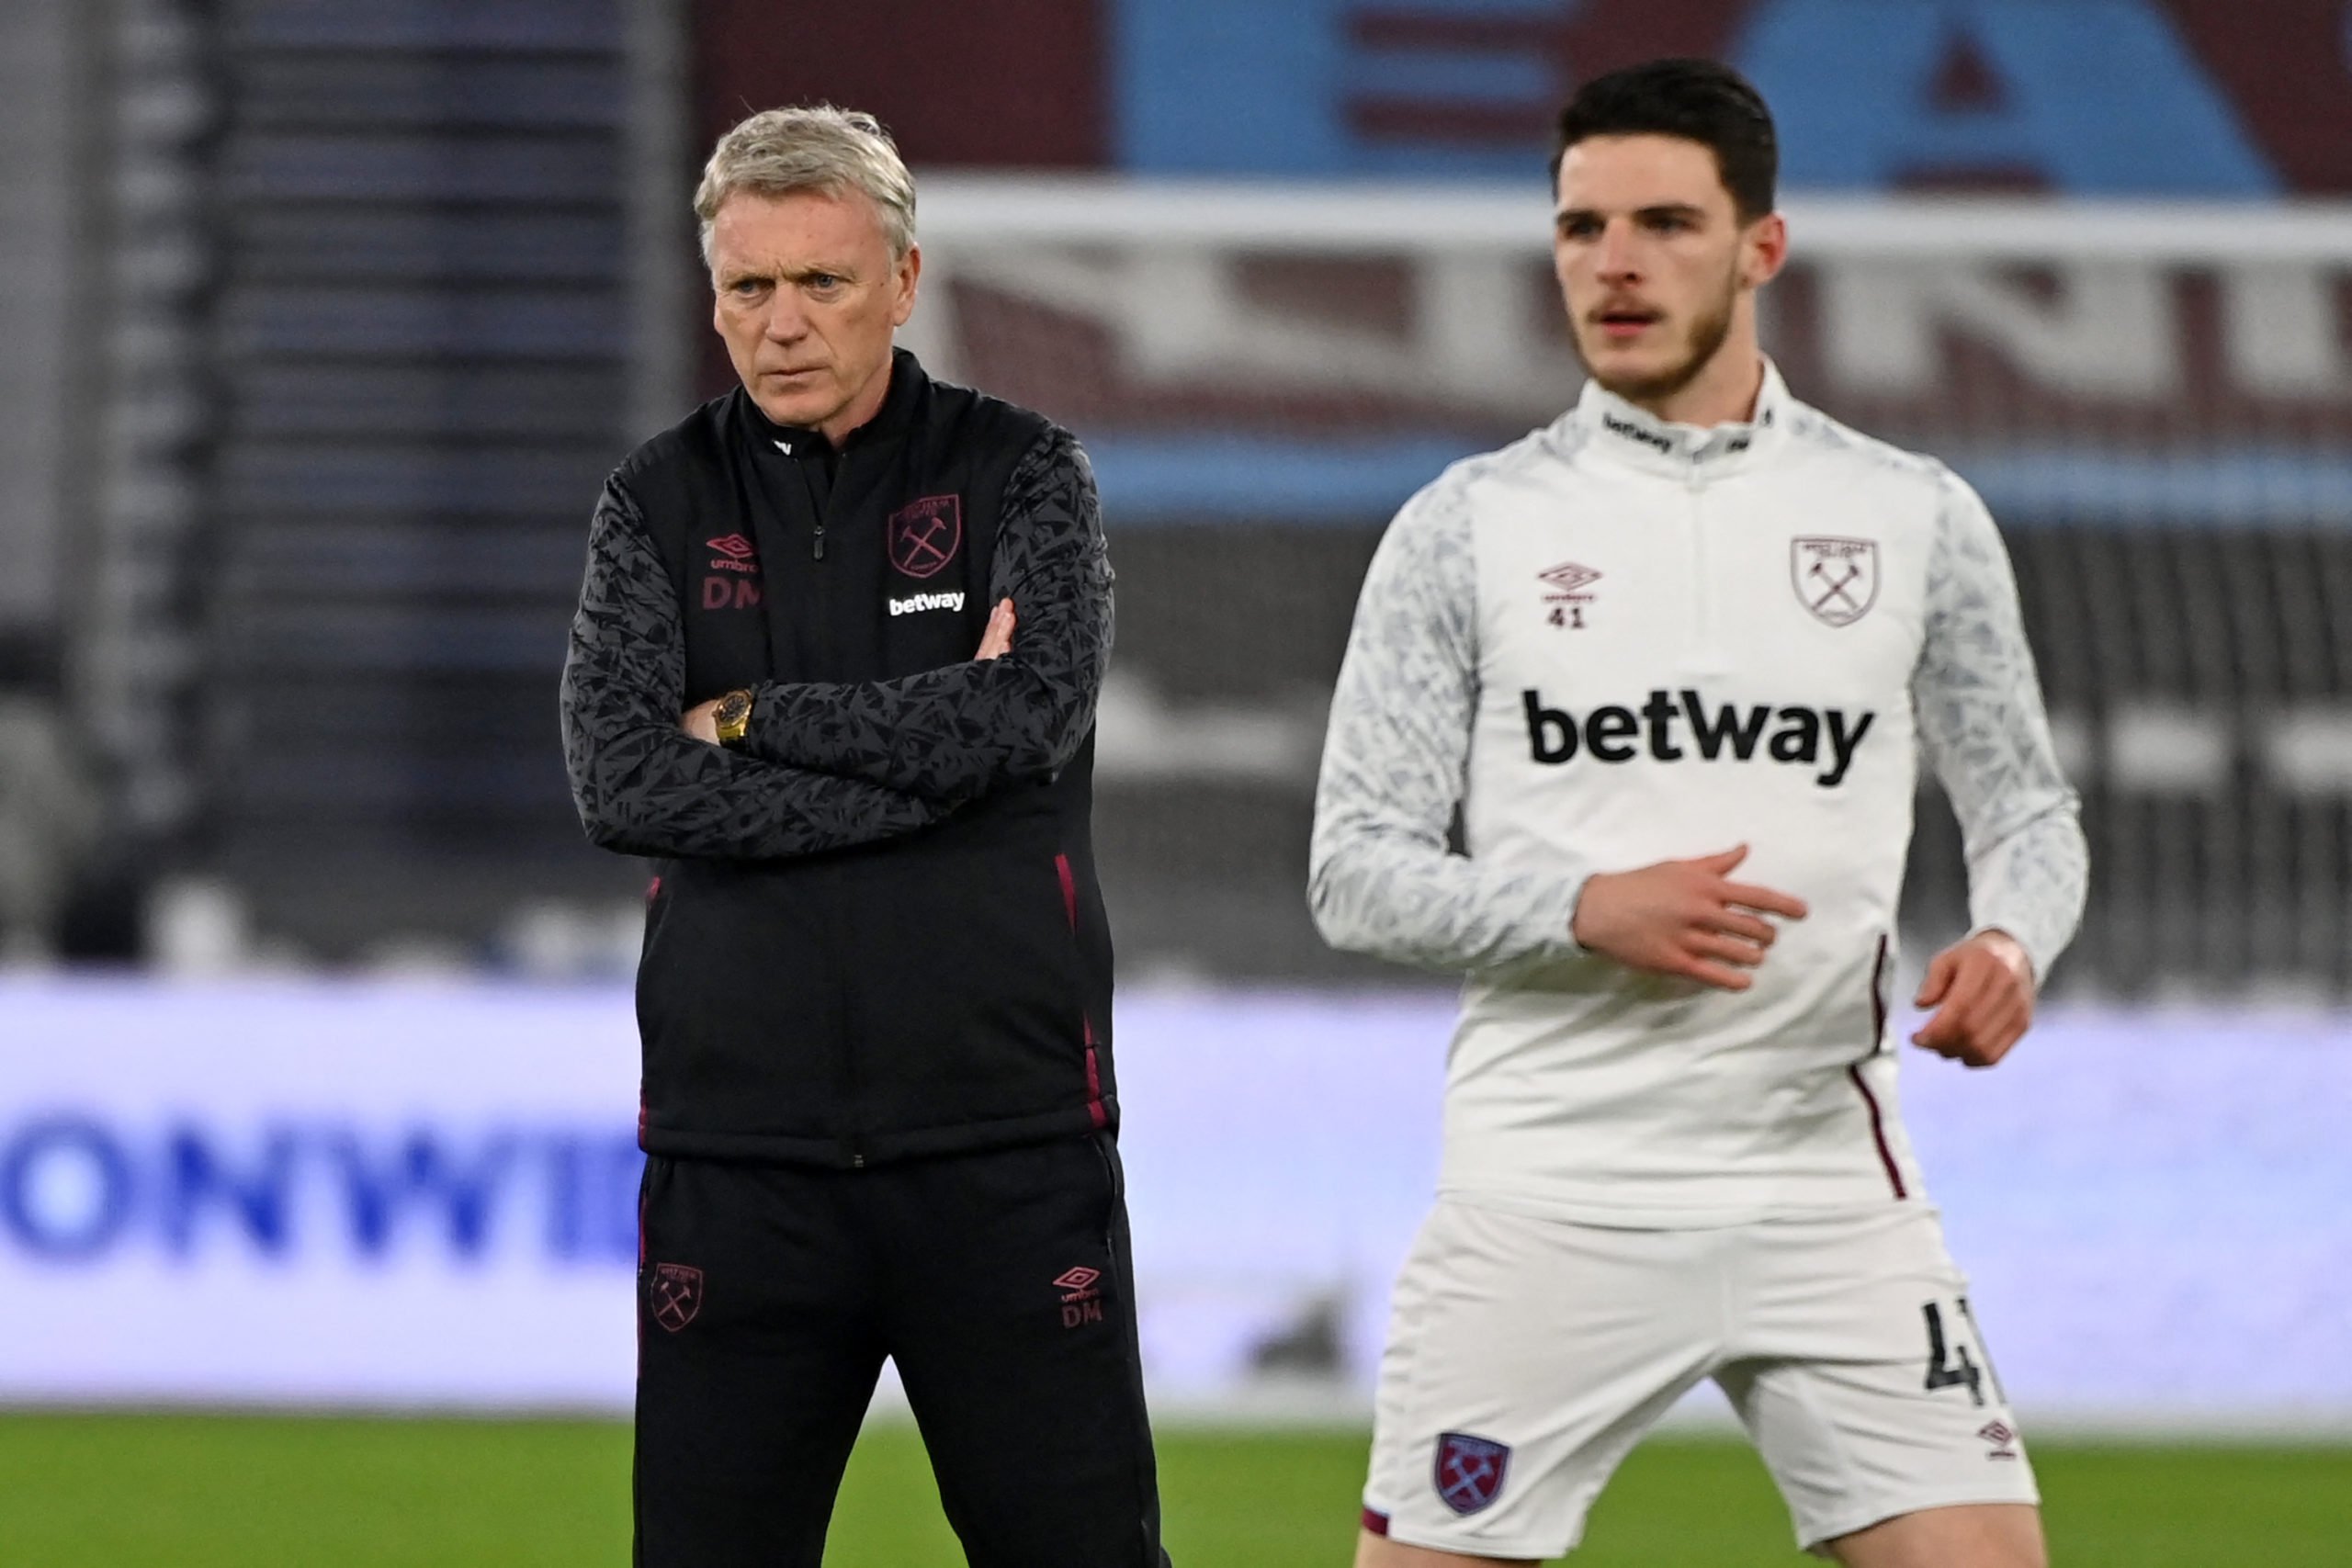 David Moyes has told Declan Rice to be ready for West Ham position change